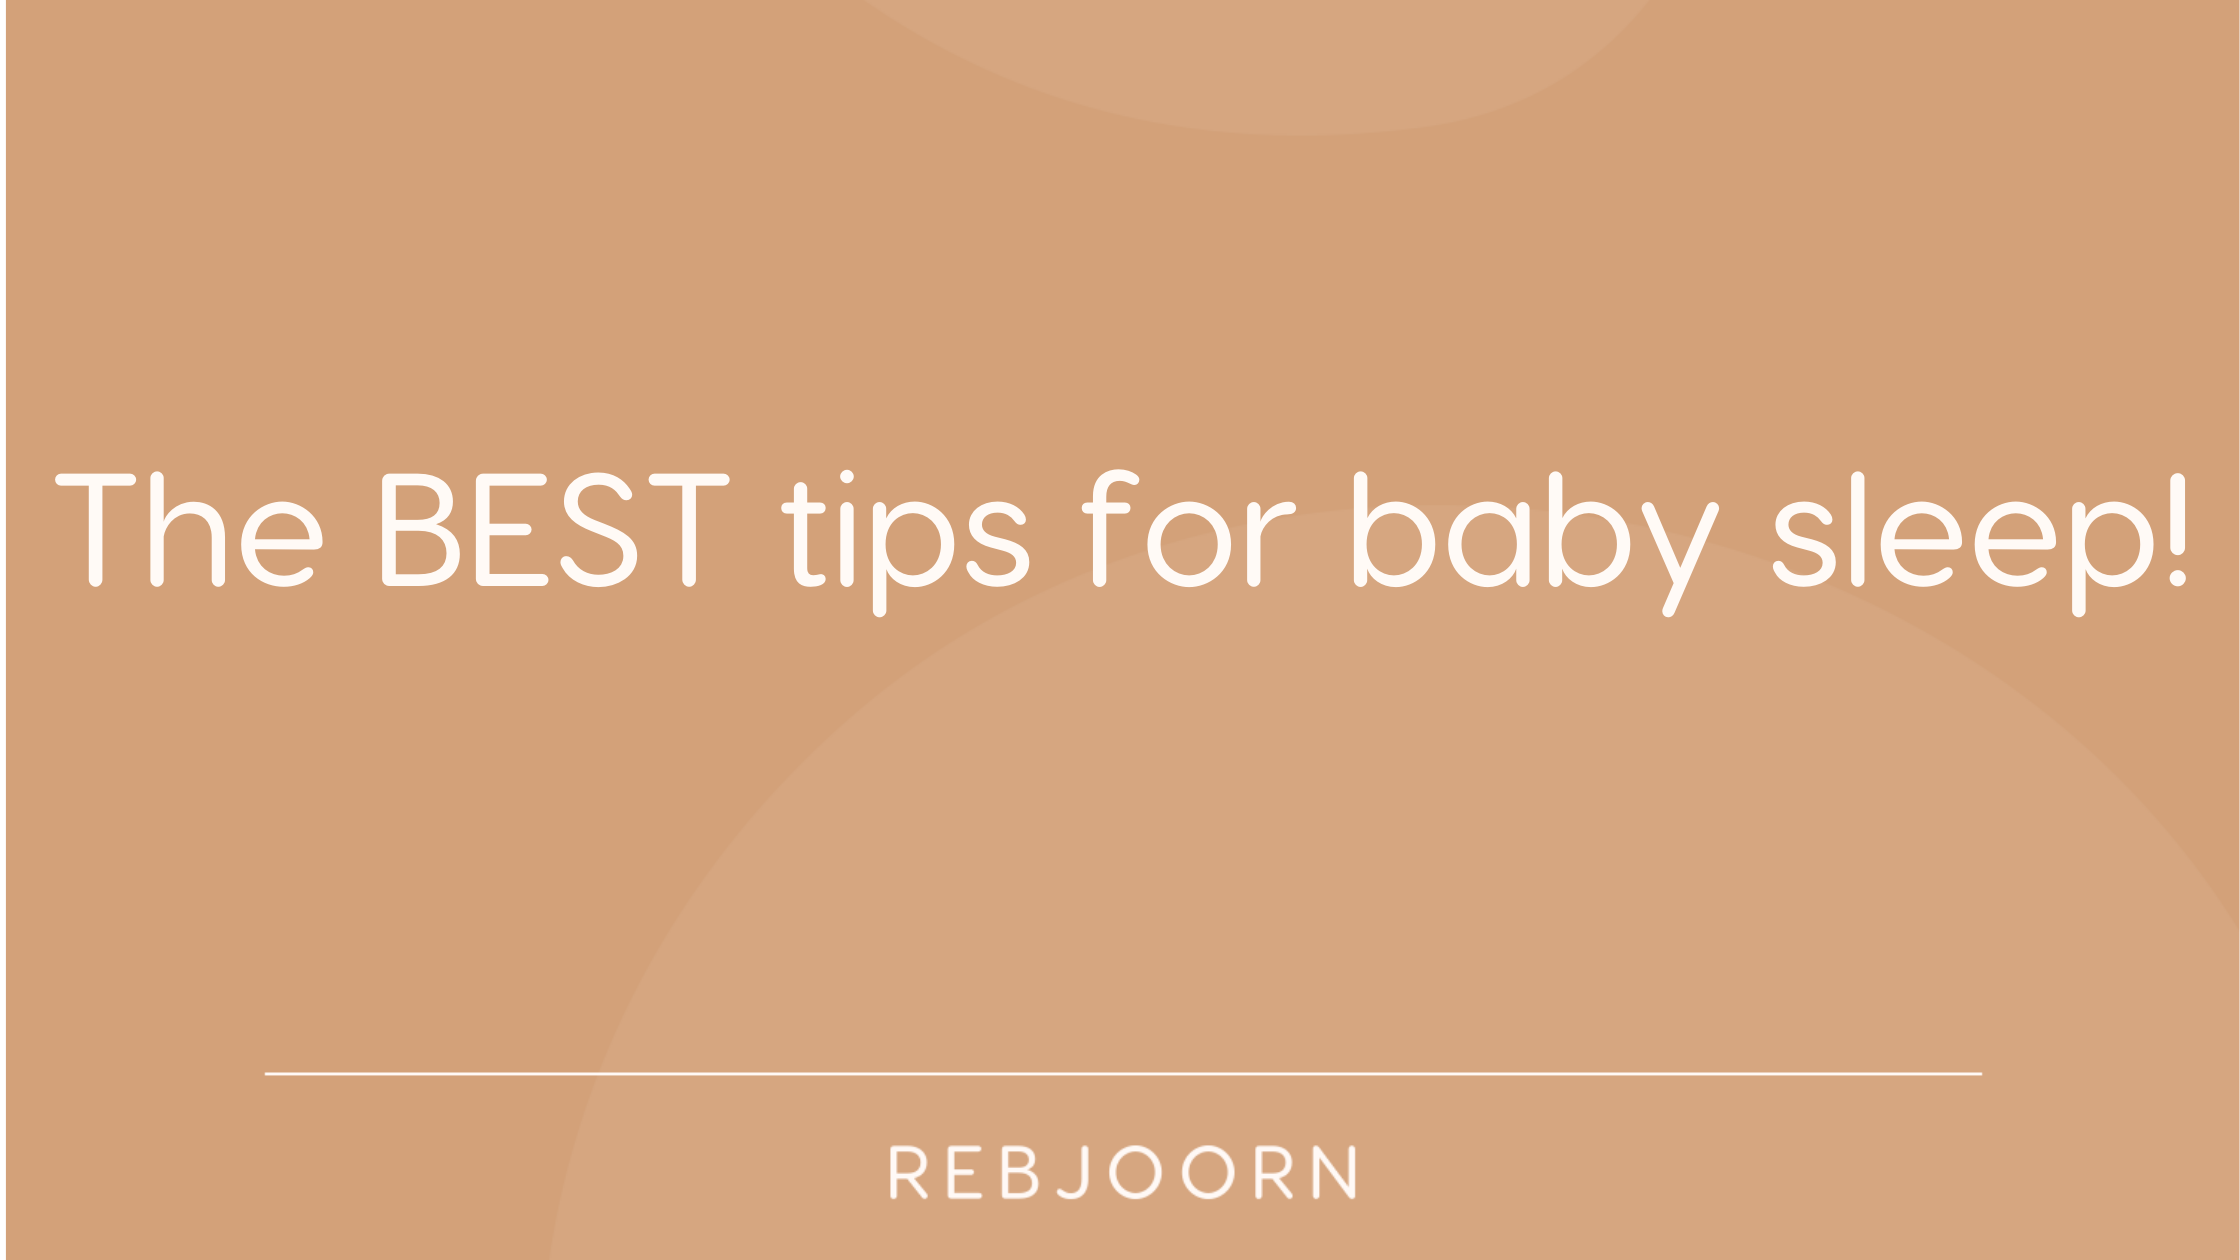 The BEST tips for baby sleep